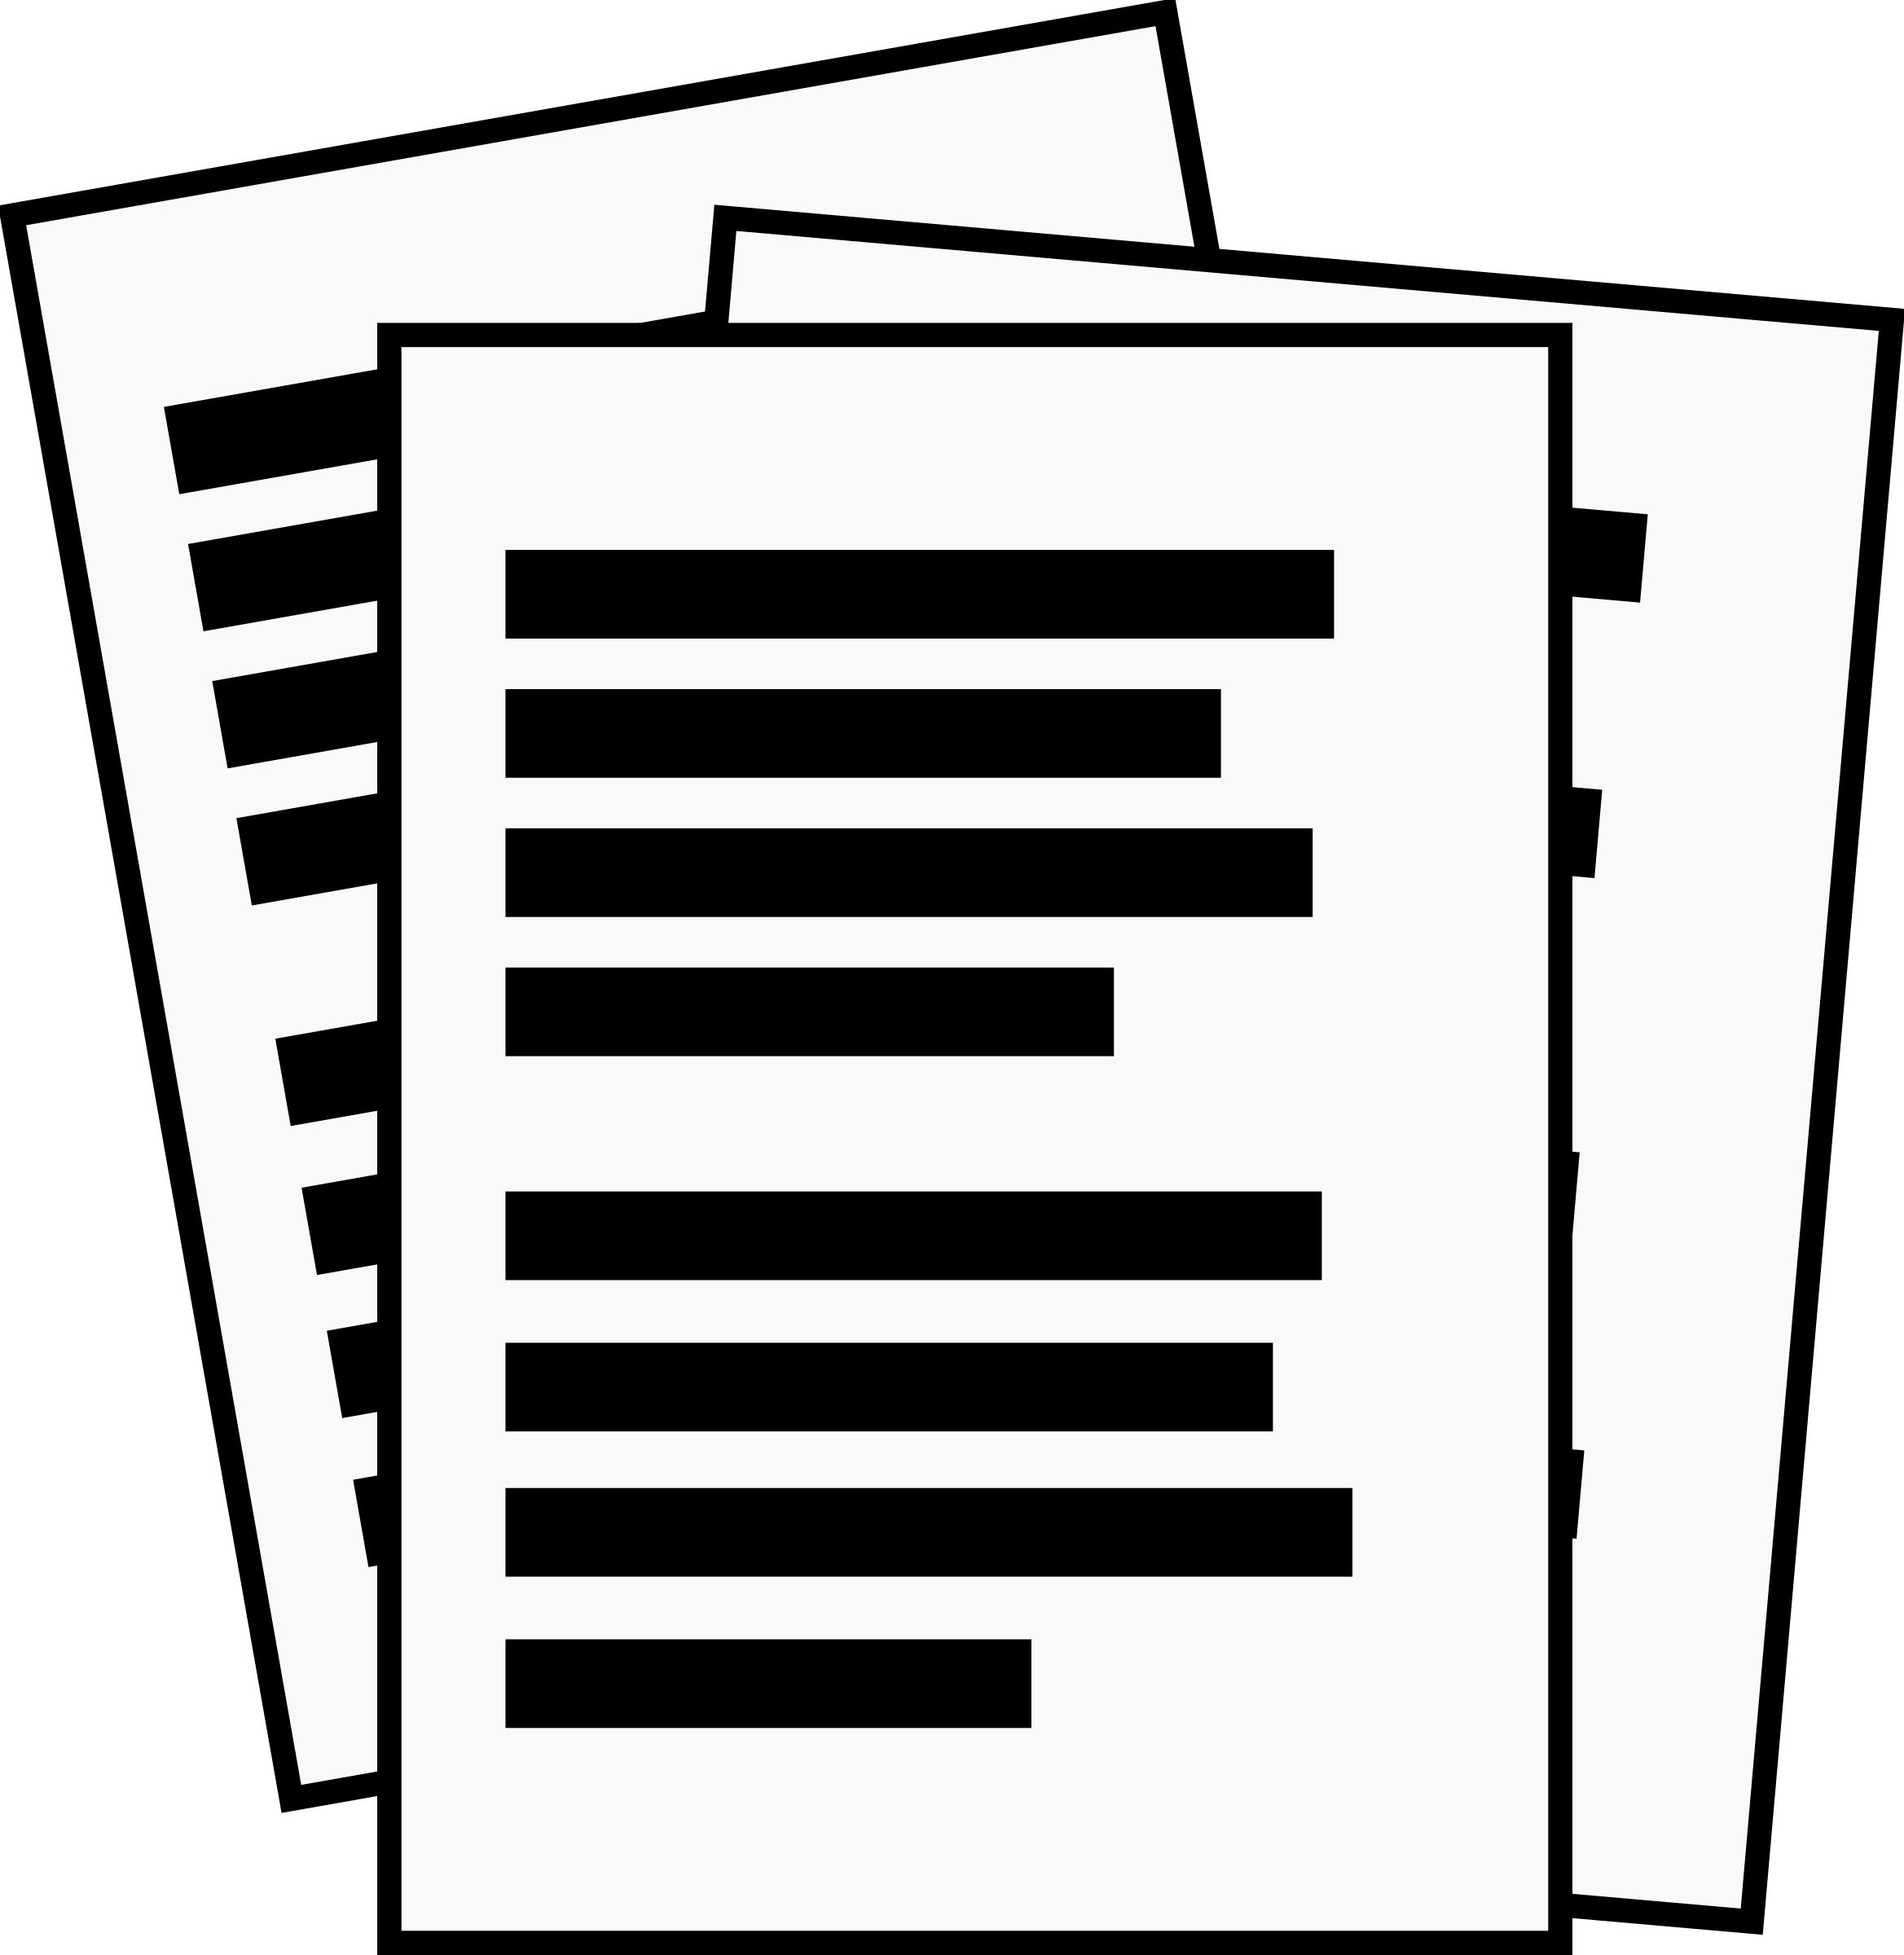 File png wikimedia commons. Clipart paper line paper